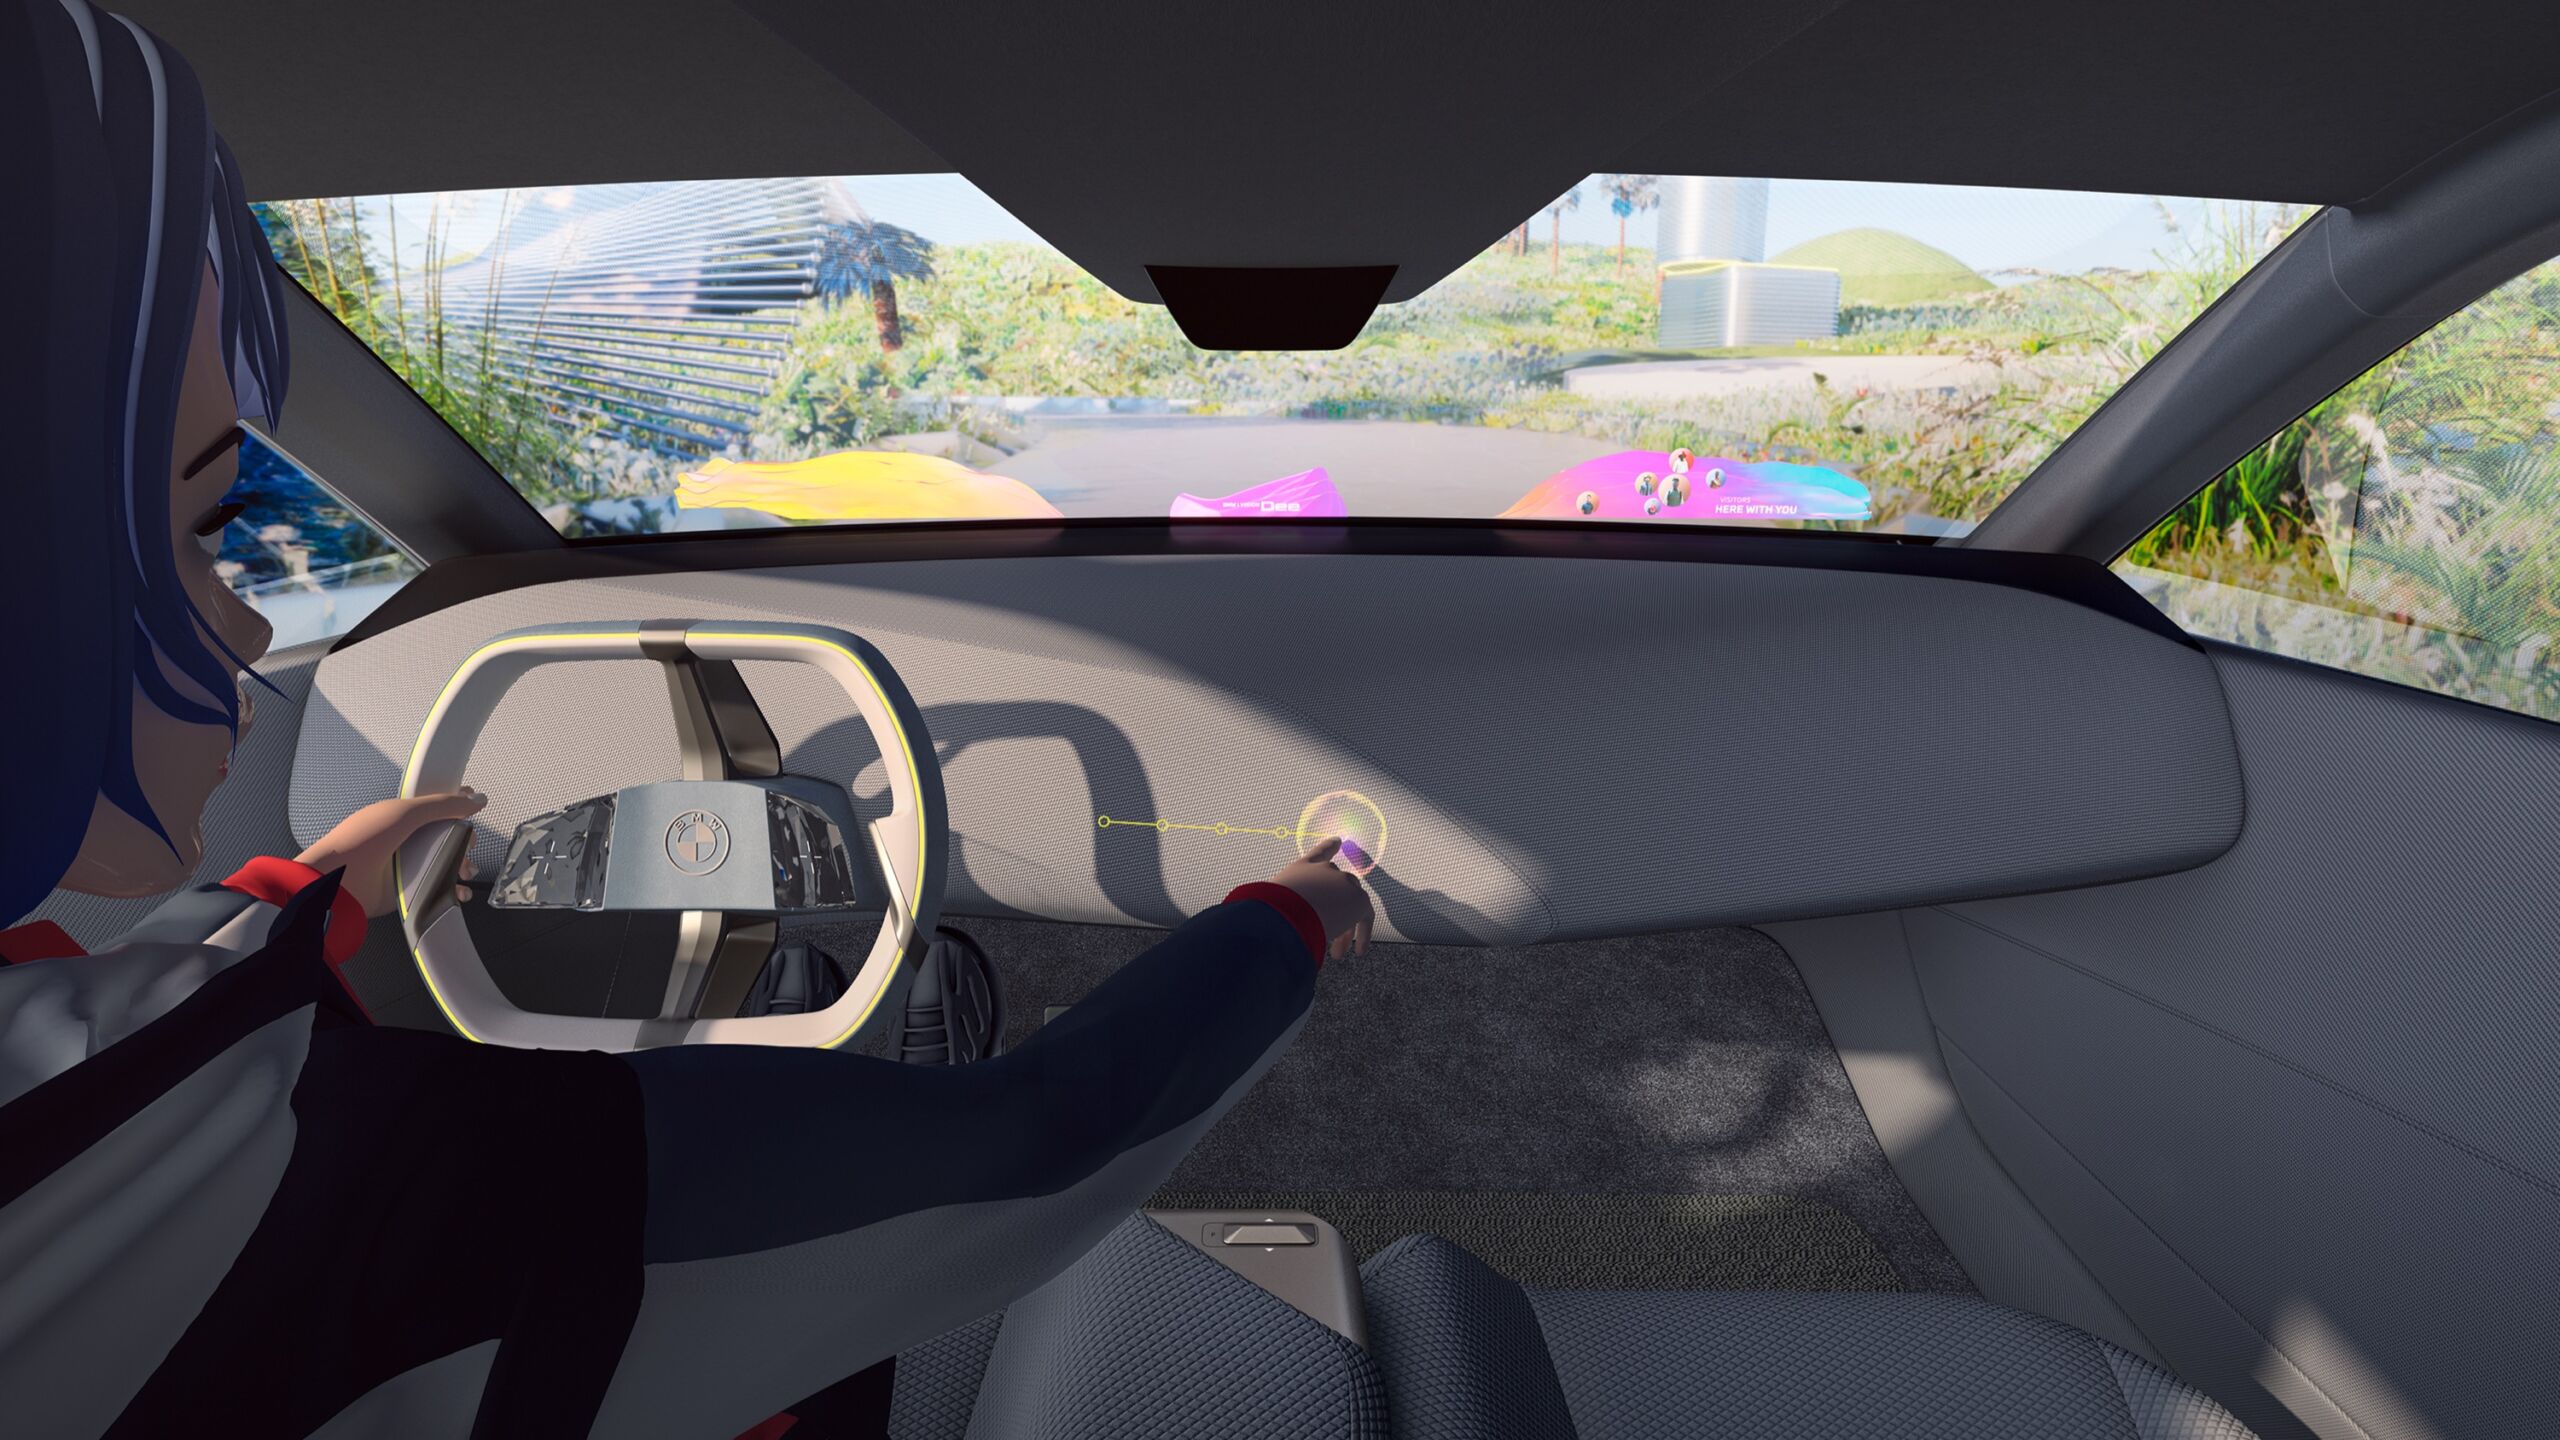 BMW is developing a full-screen head-up display for 2025's Neue Klasse